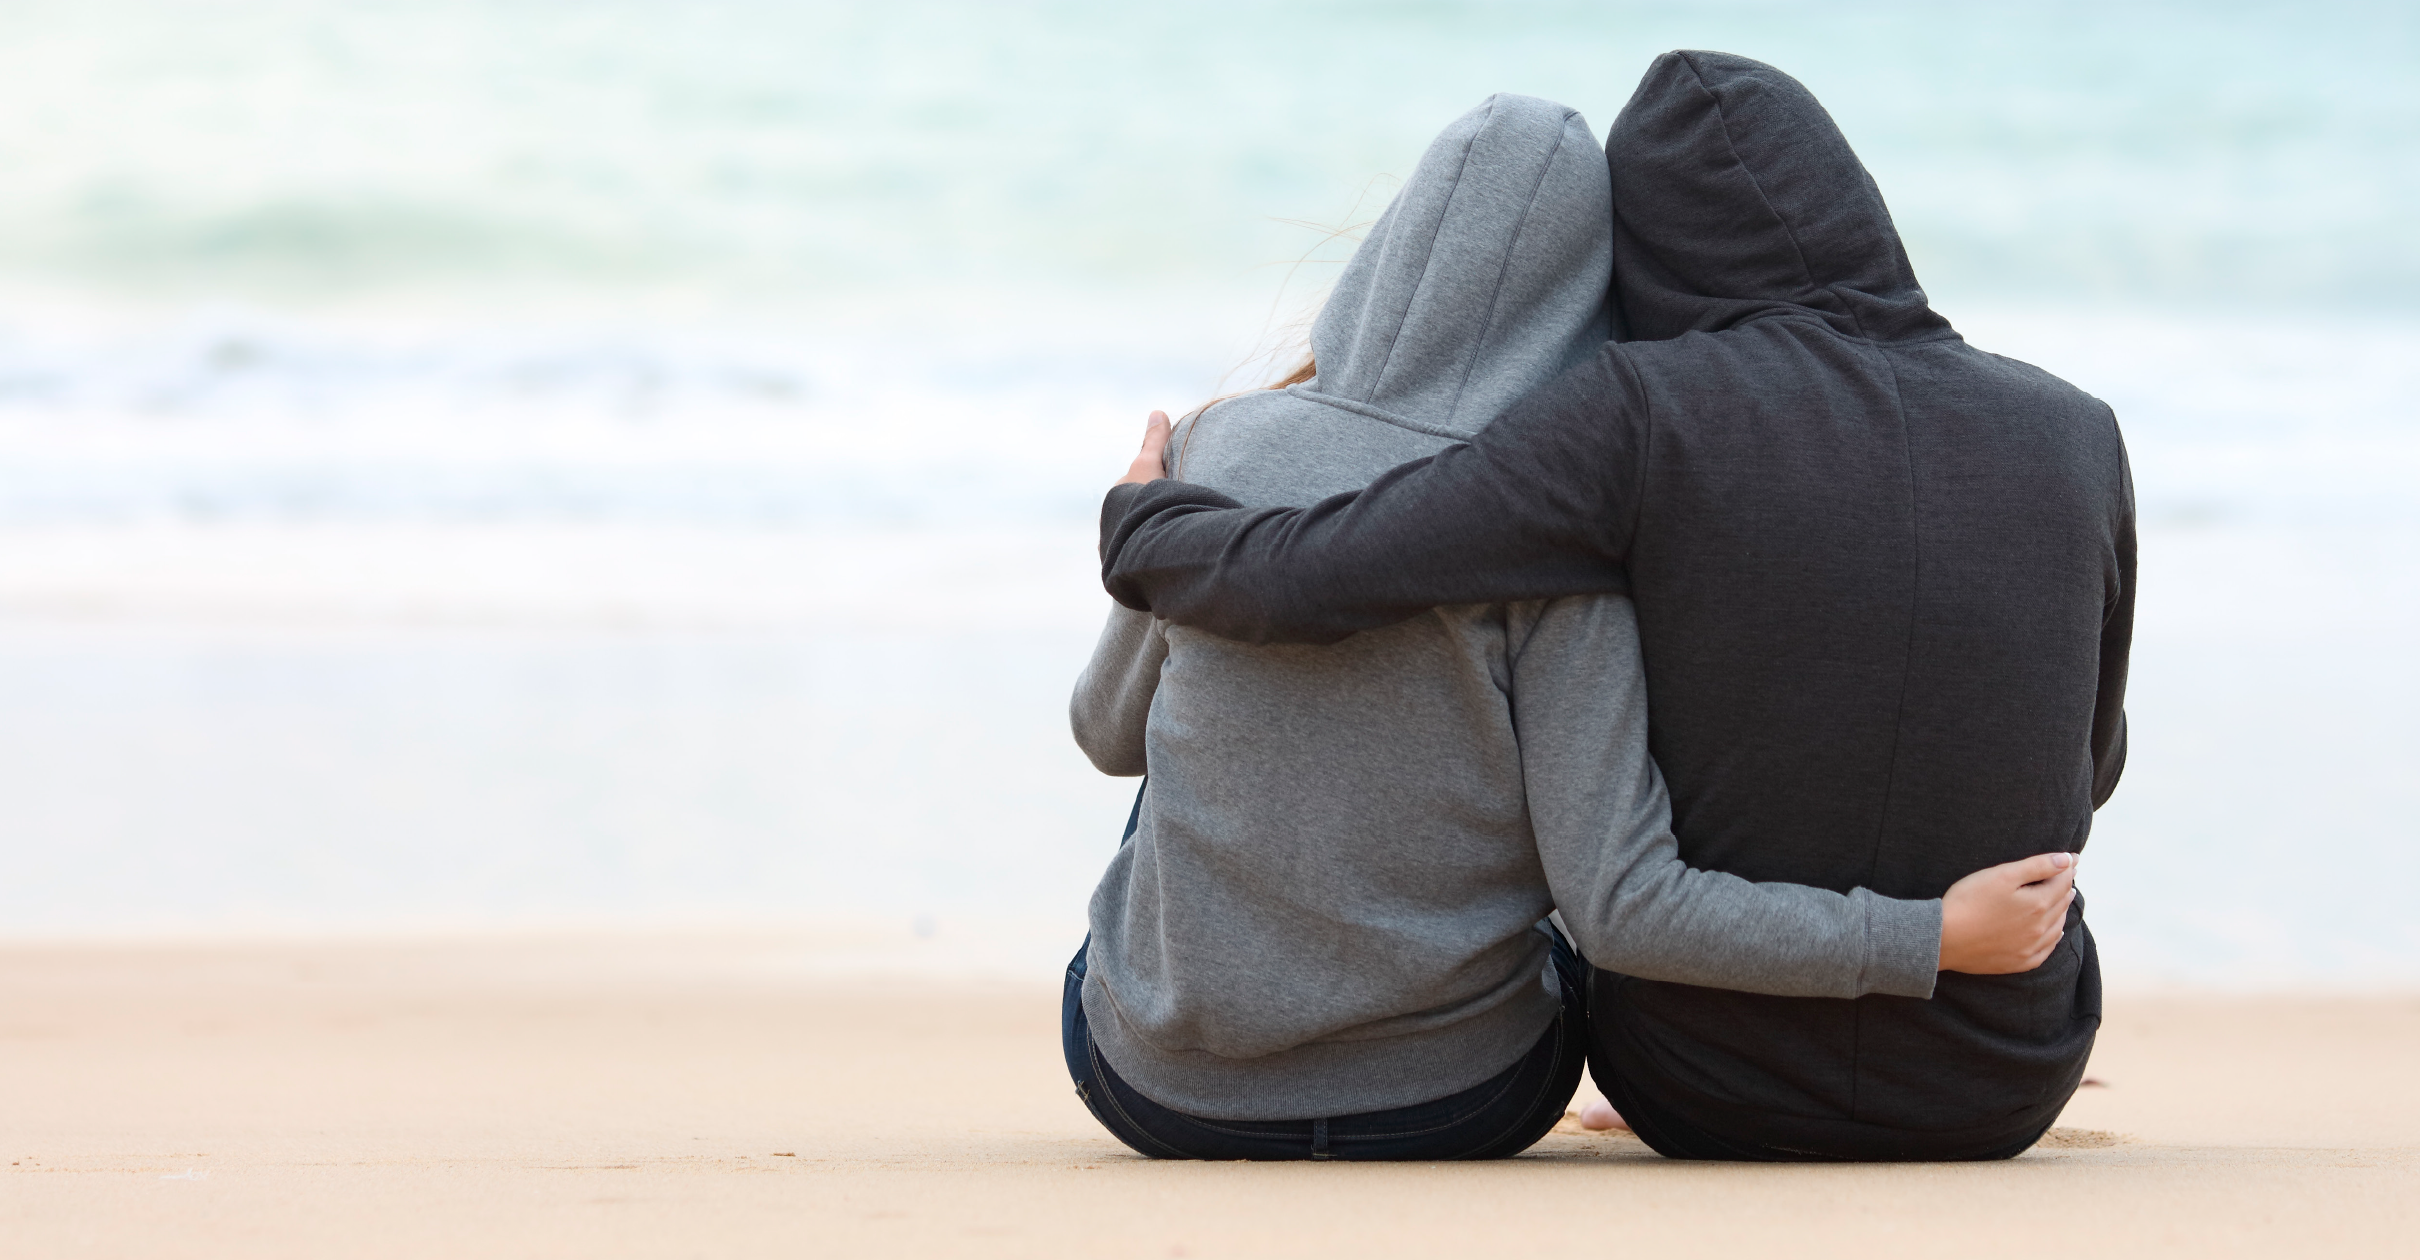 A couple holds each other as they sit on the beach and look out to see.